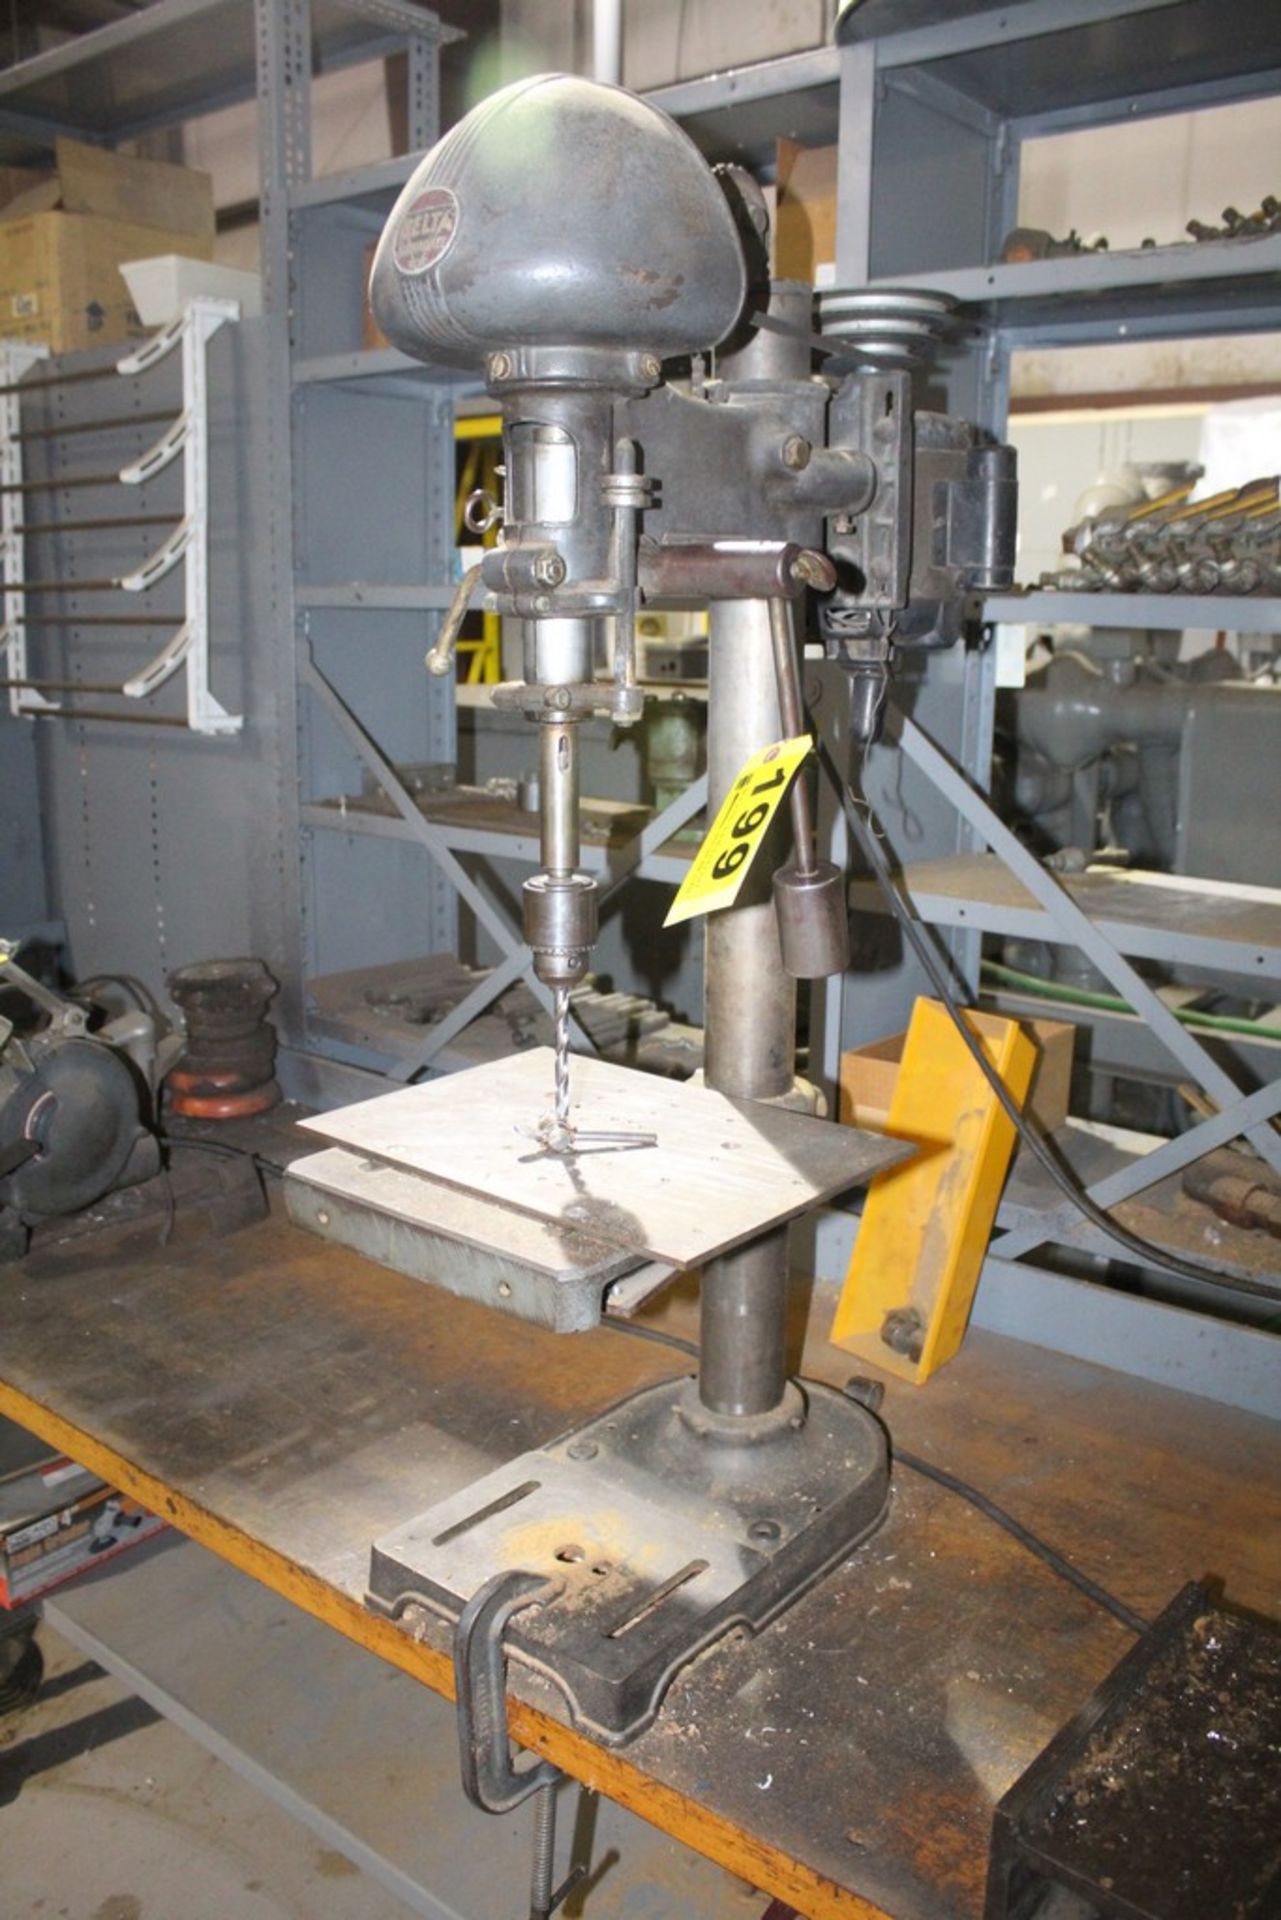 DELTA MILWAUKEE 14" BENCHTOP DRILL PRESS WITH SLOTTED TABLE AND BASE - Image 2 of 2